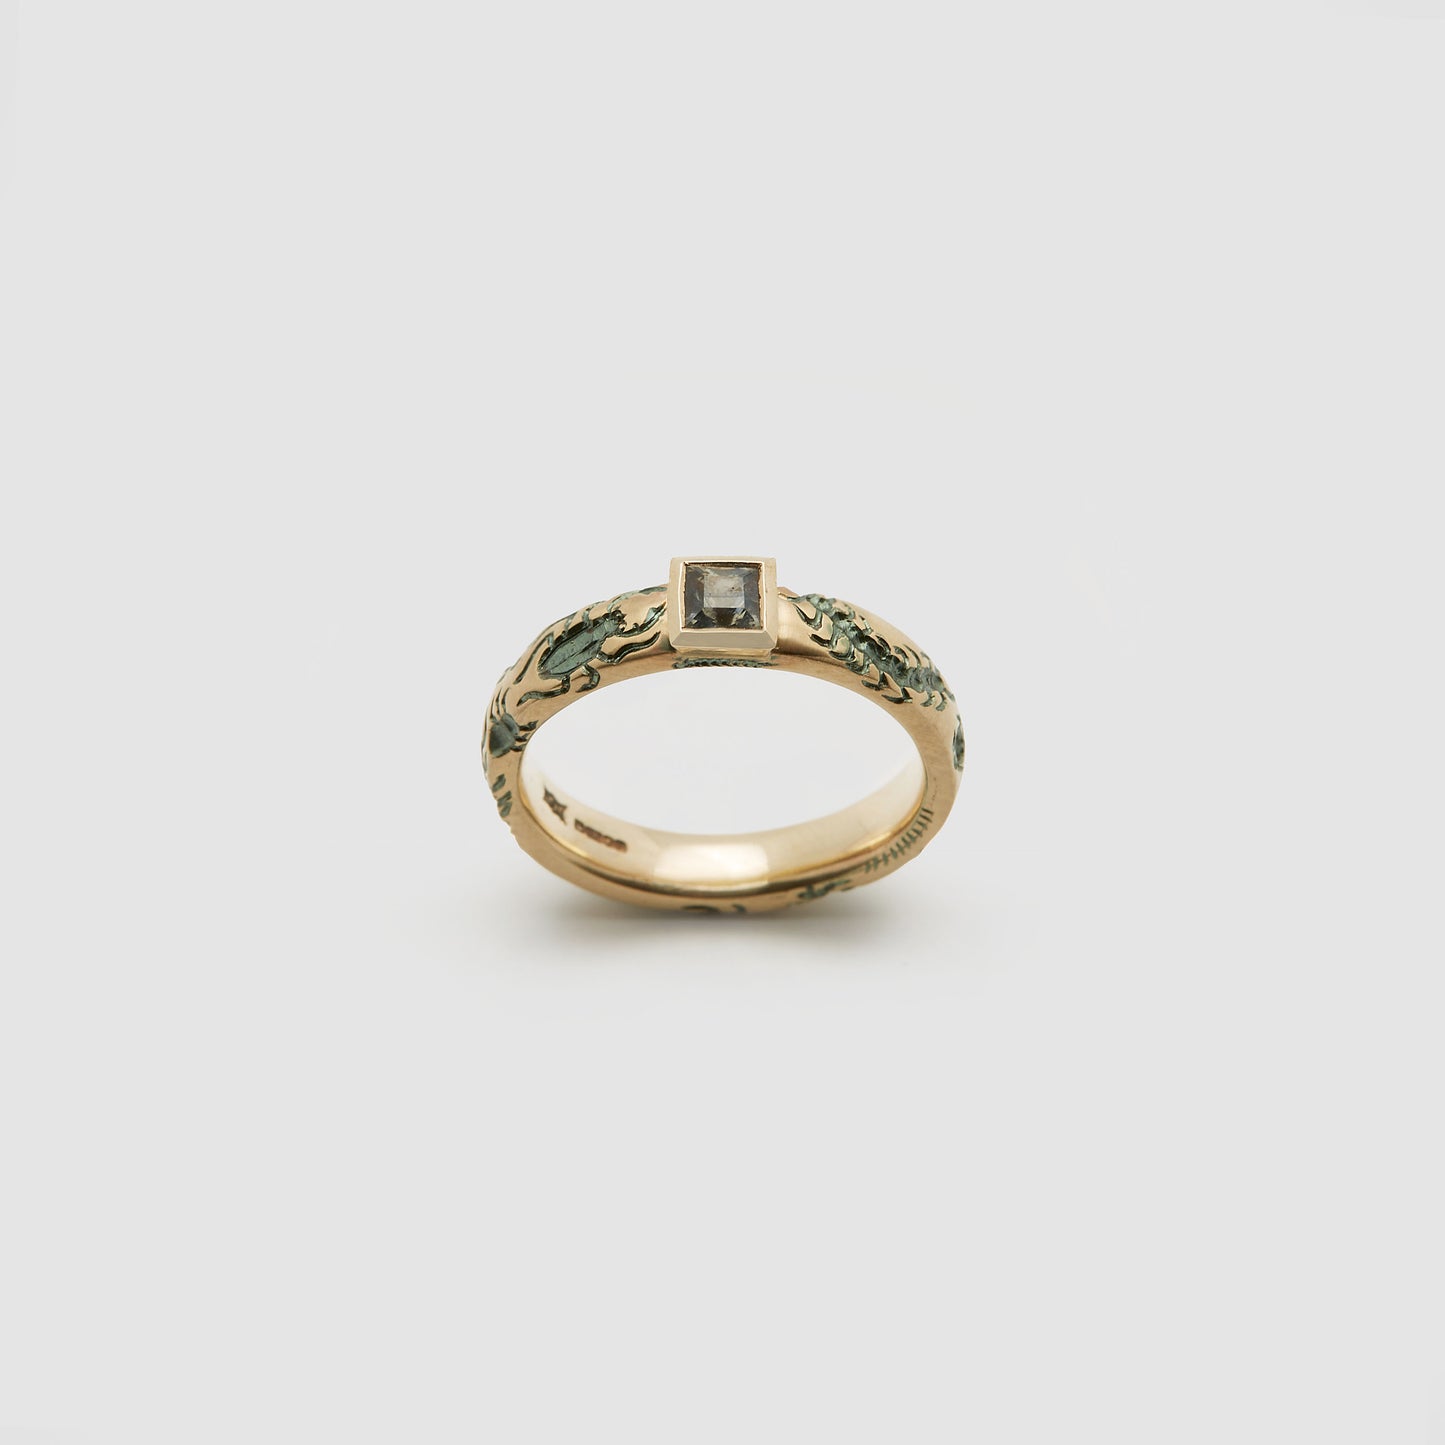 Castro Smith Jewelry Gold Undergrowth Ring with a Square Cut Sapphire.